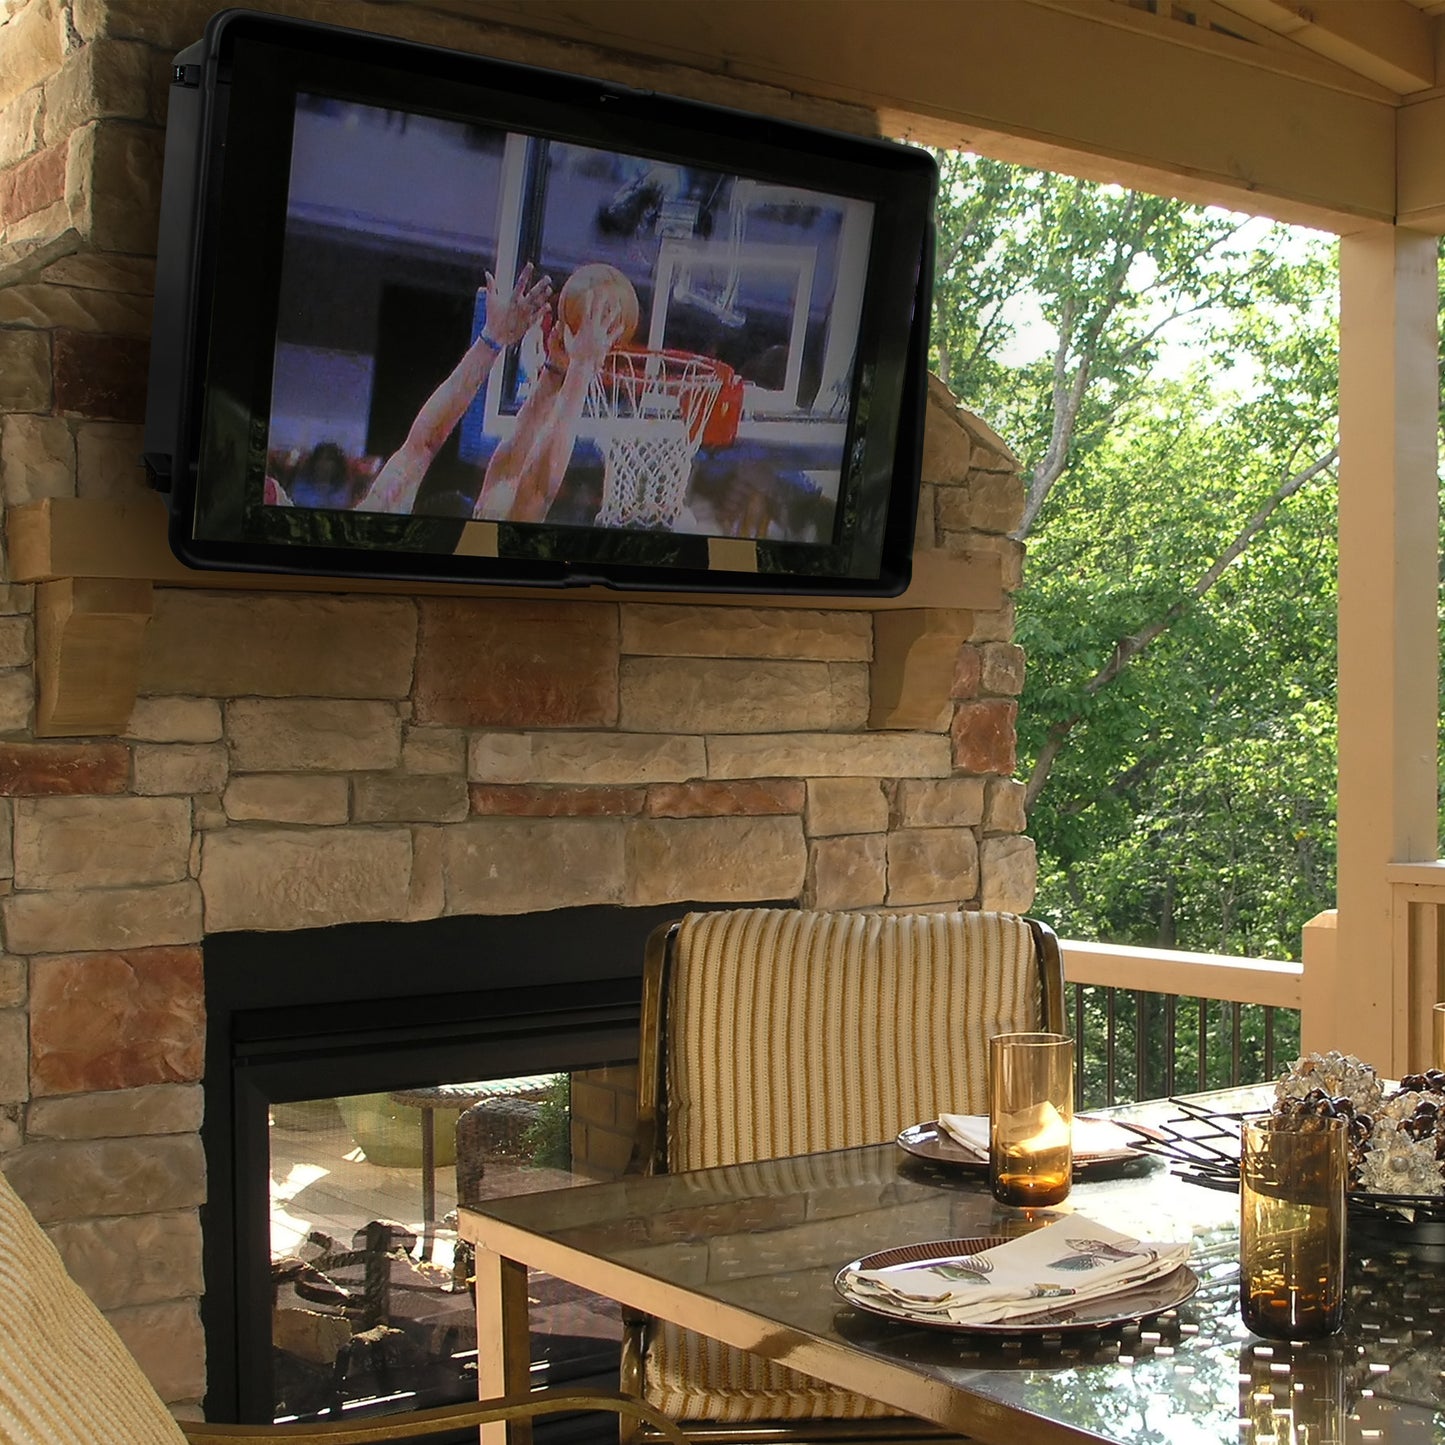 Storm Shell TV cover outdoors under patio: Weather proof TV cover under a patio covering open with tv on.